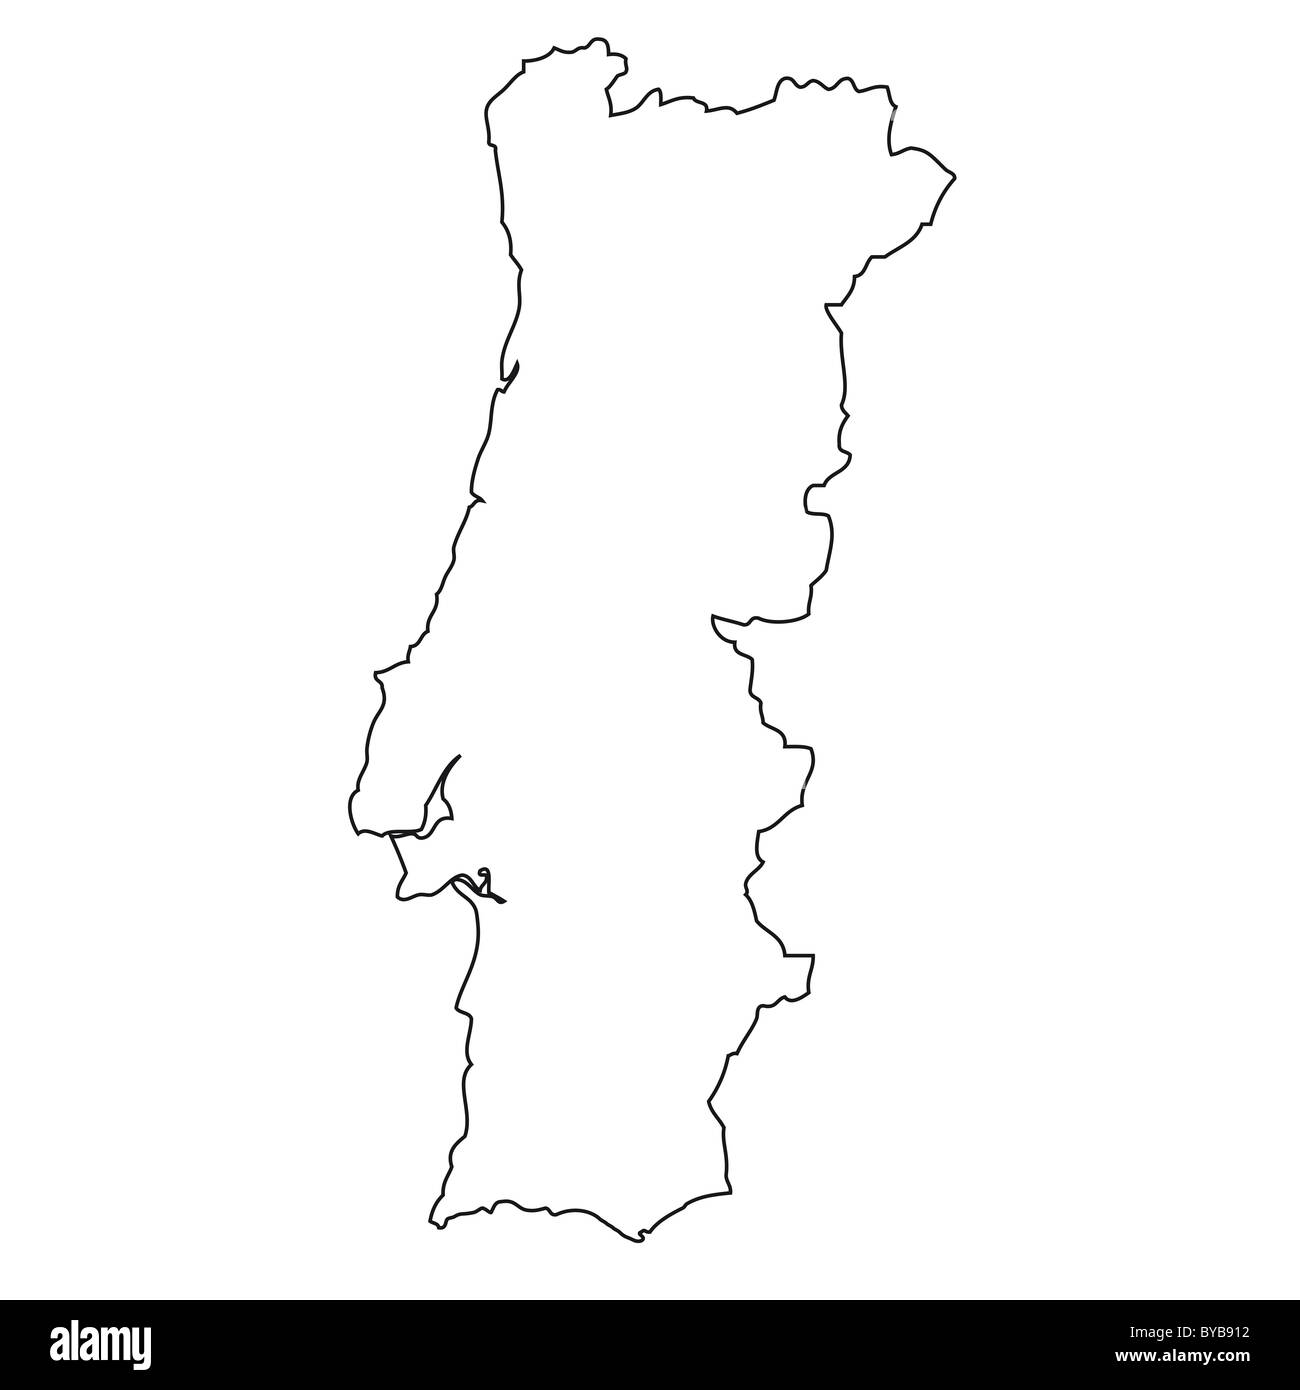 Portugal Map PNG and Portugal Map Transparent Clipart Free